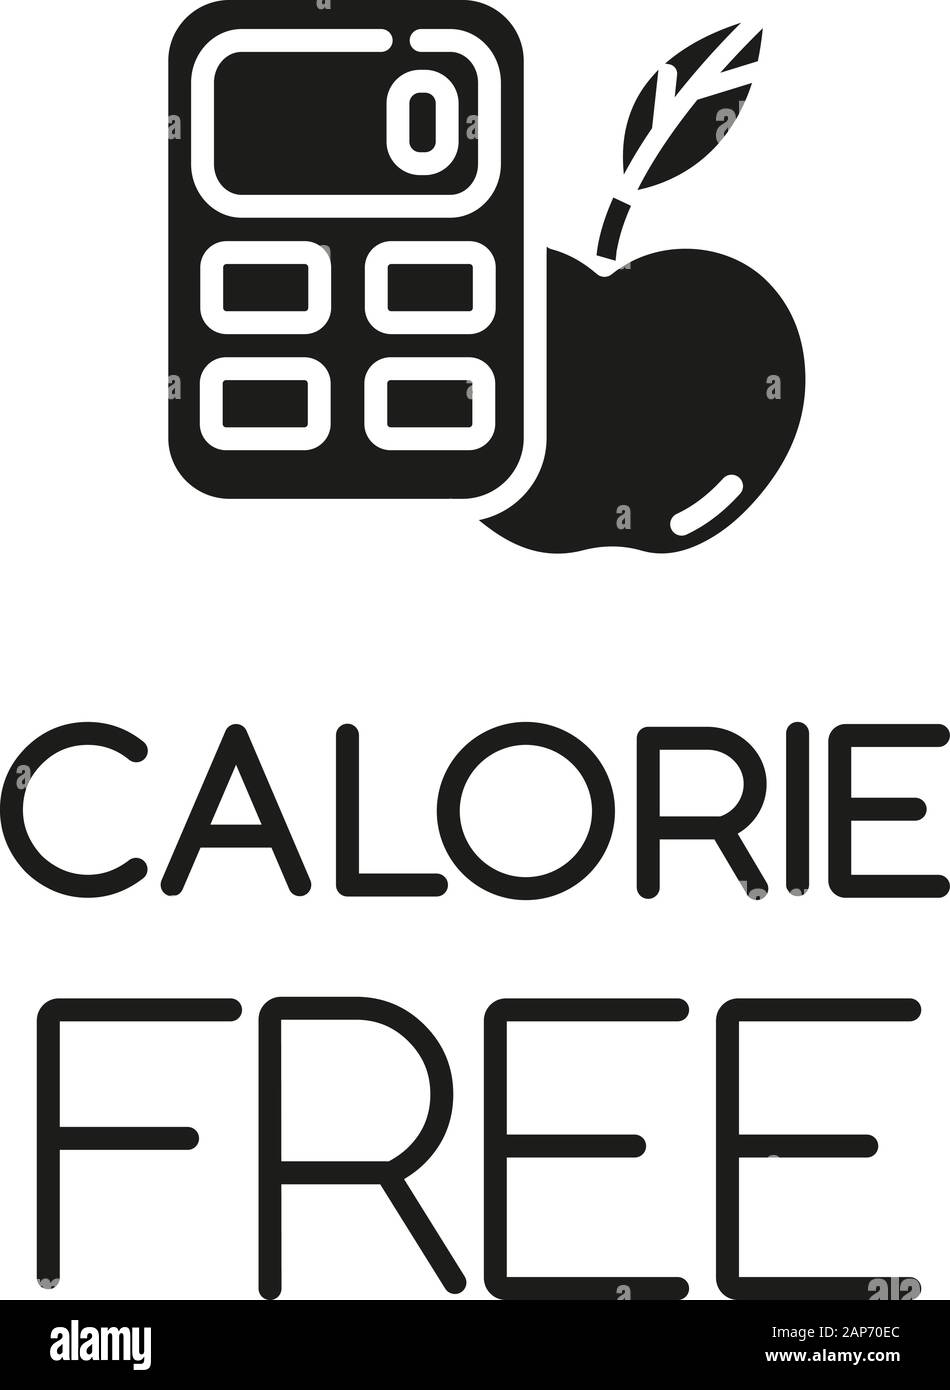 Calorie free glyph icon. Low calories snacks for weight loss. Product free ingredient. Fresh organic food. Nutritious fruits. Silhouette symbol. Negat Stock Vector